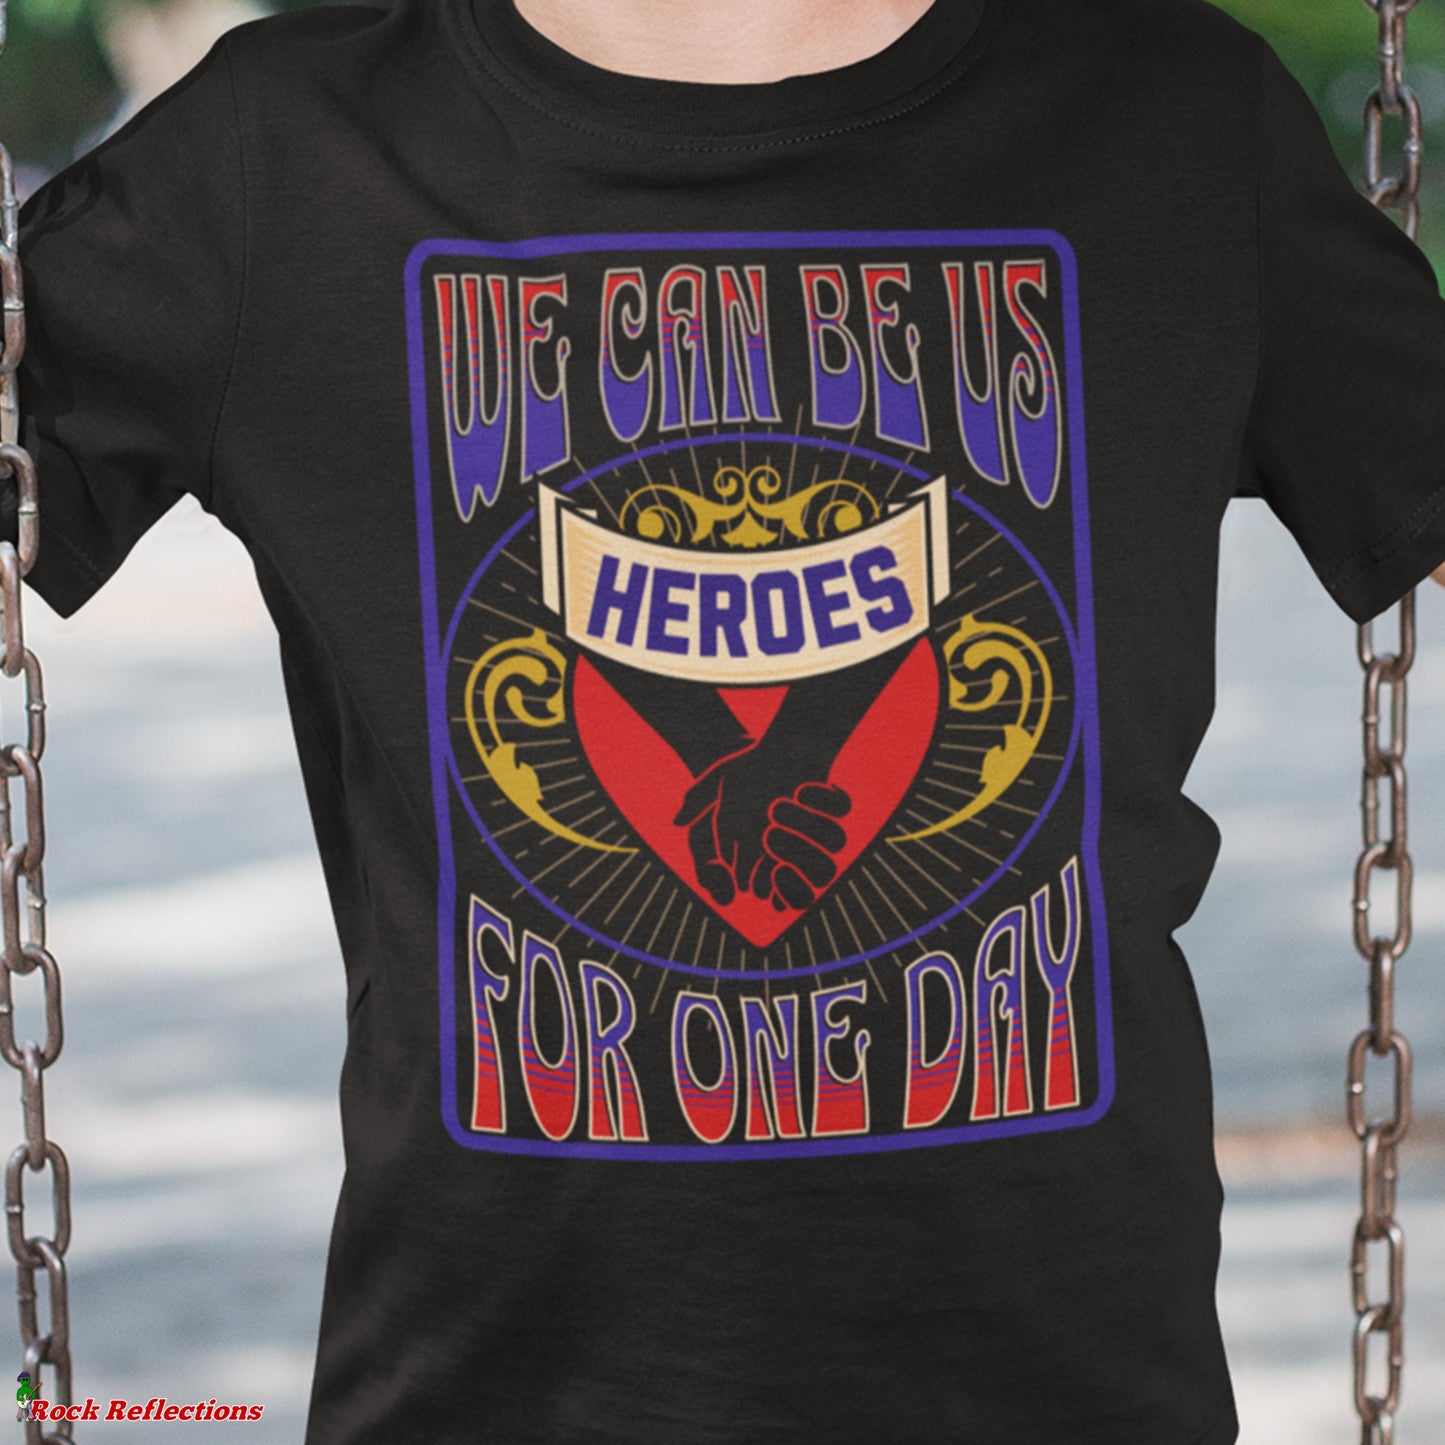 We Can Be Us T-Shirt SPOD